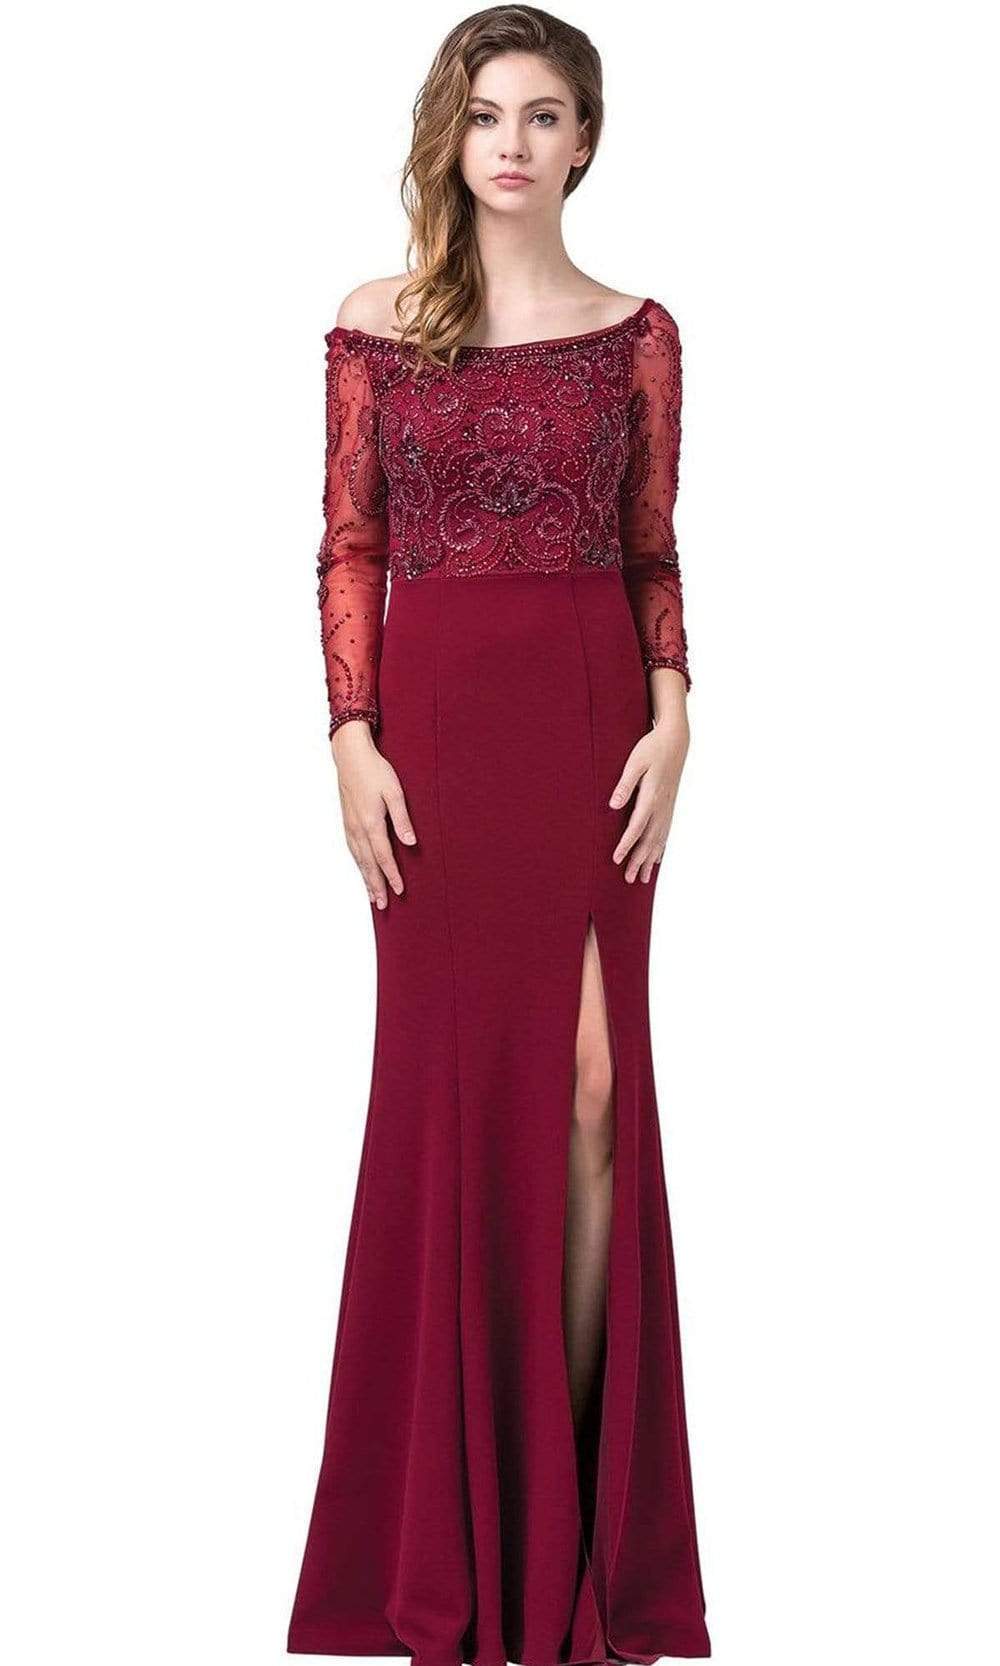 Dancing Queen - 2672 Embellished Long Sleeve Bateau Sheath Gown Special Occasion Dress XS / Burgundy